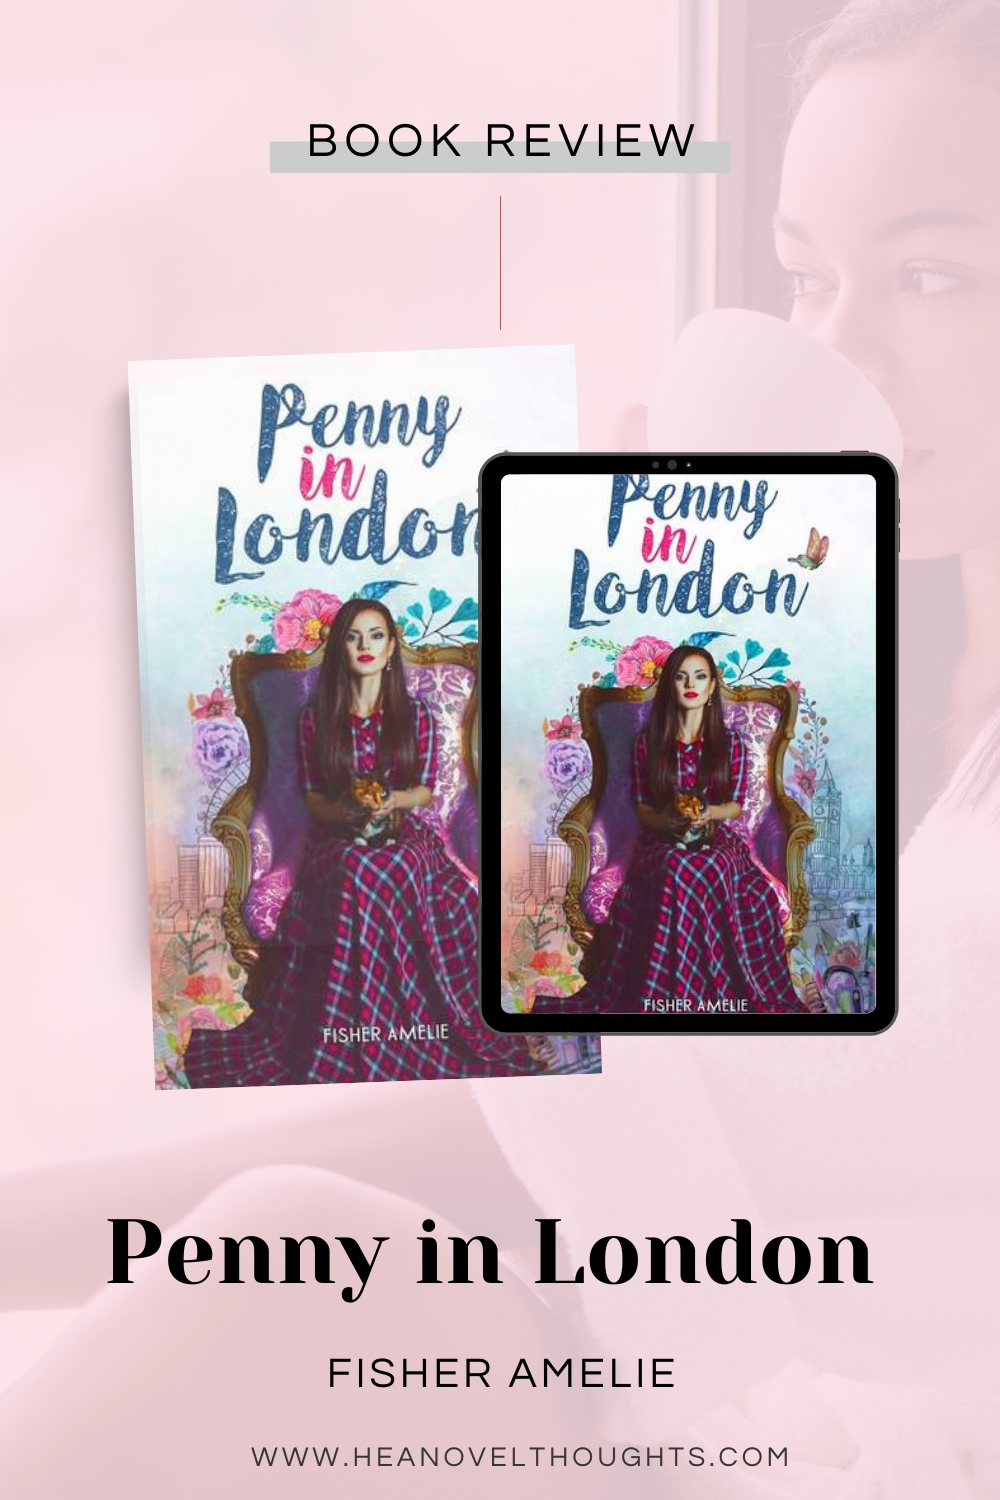 Penny in London by Fisher Amelie